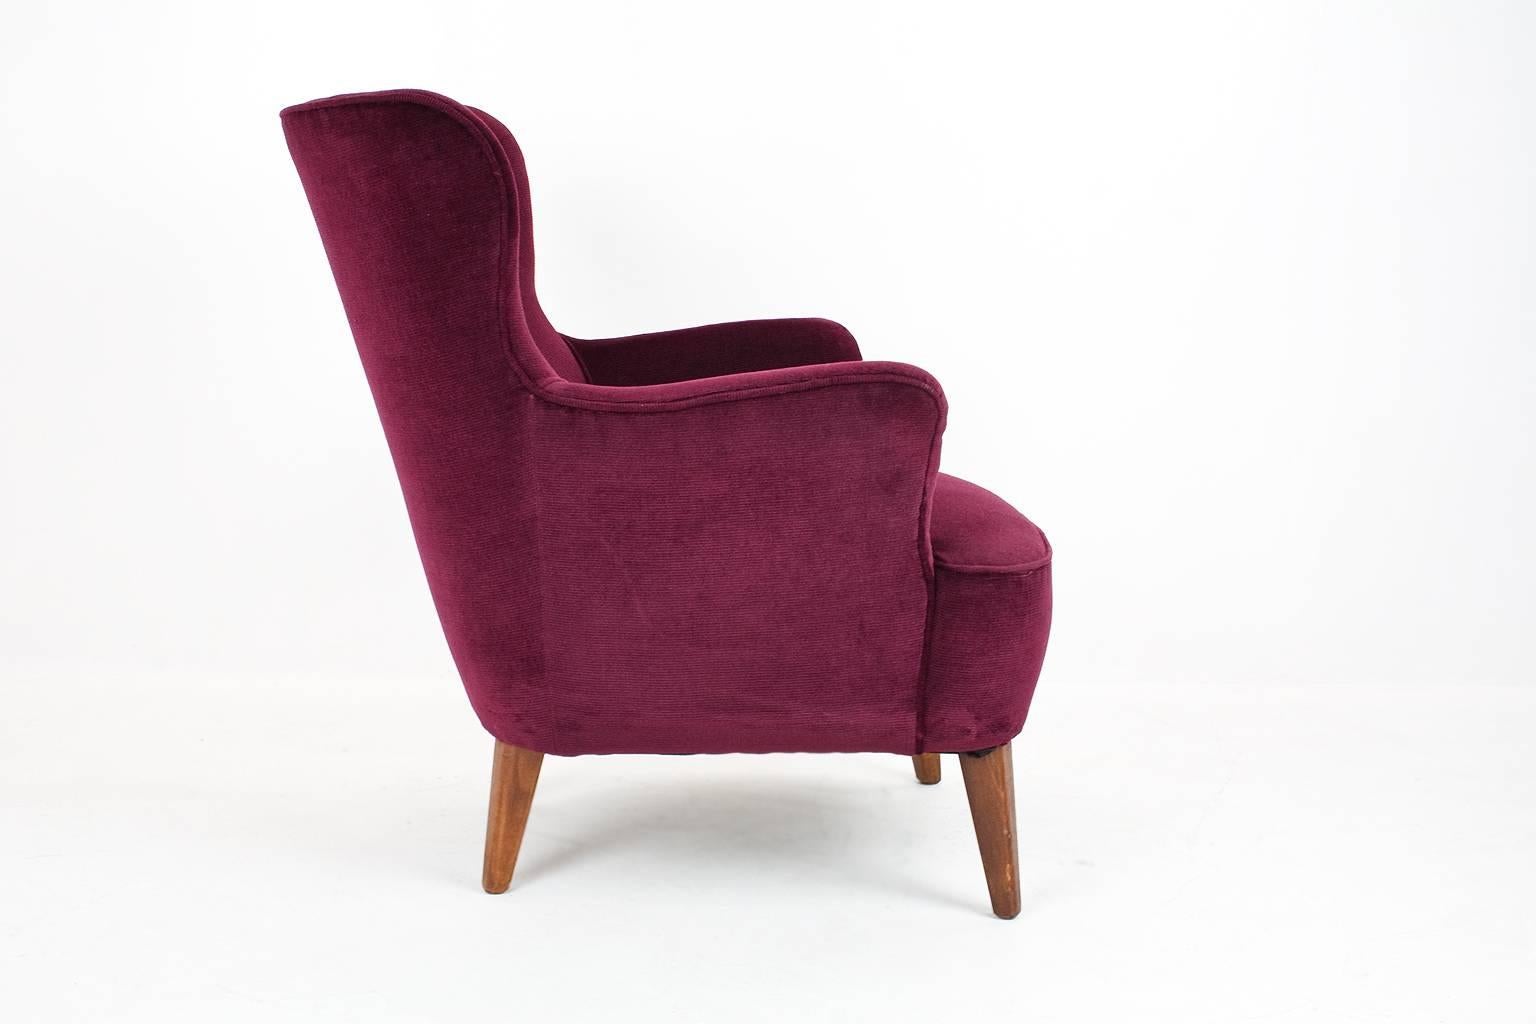 Mid-20th Century 1950s, Dutch Mid-Century Modern Armchair by Theo Ruth for Artifort, Netherlands